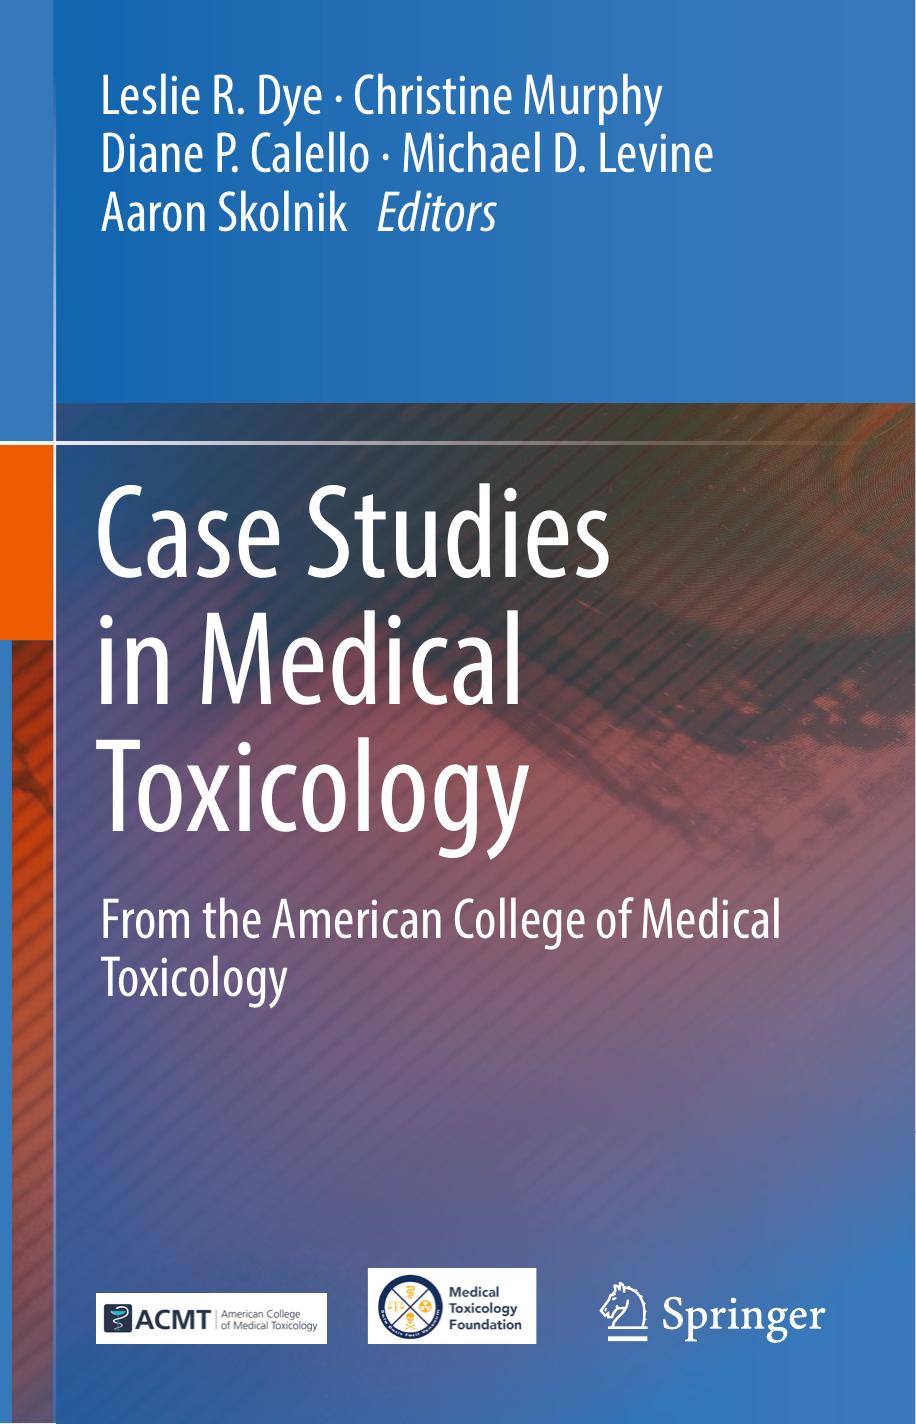 CASE STUDIES IN MEDICAL TOXICOLOGY 2017